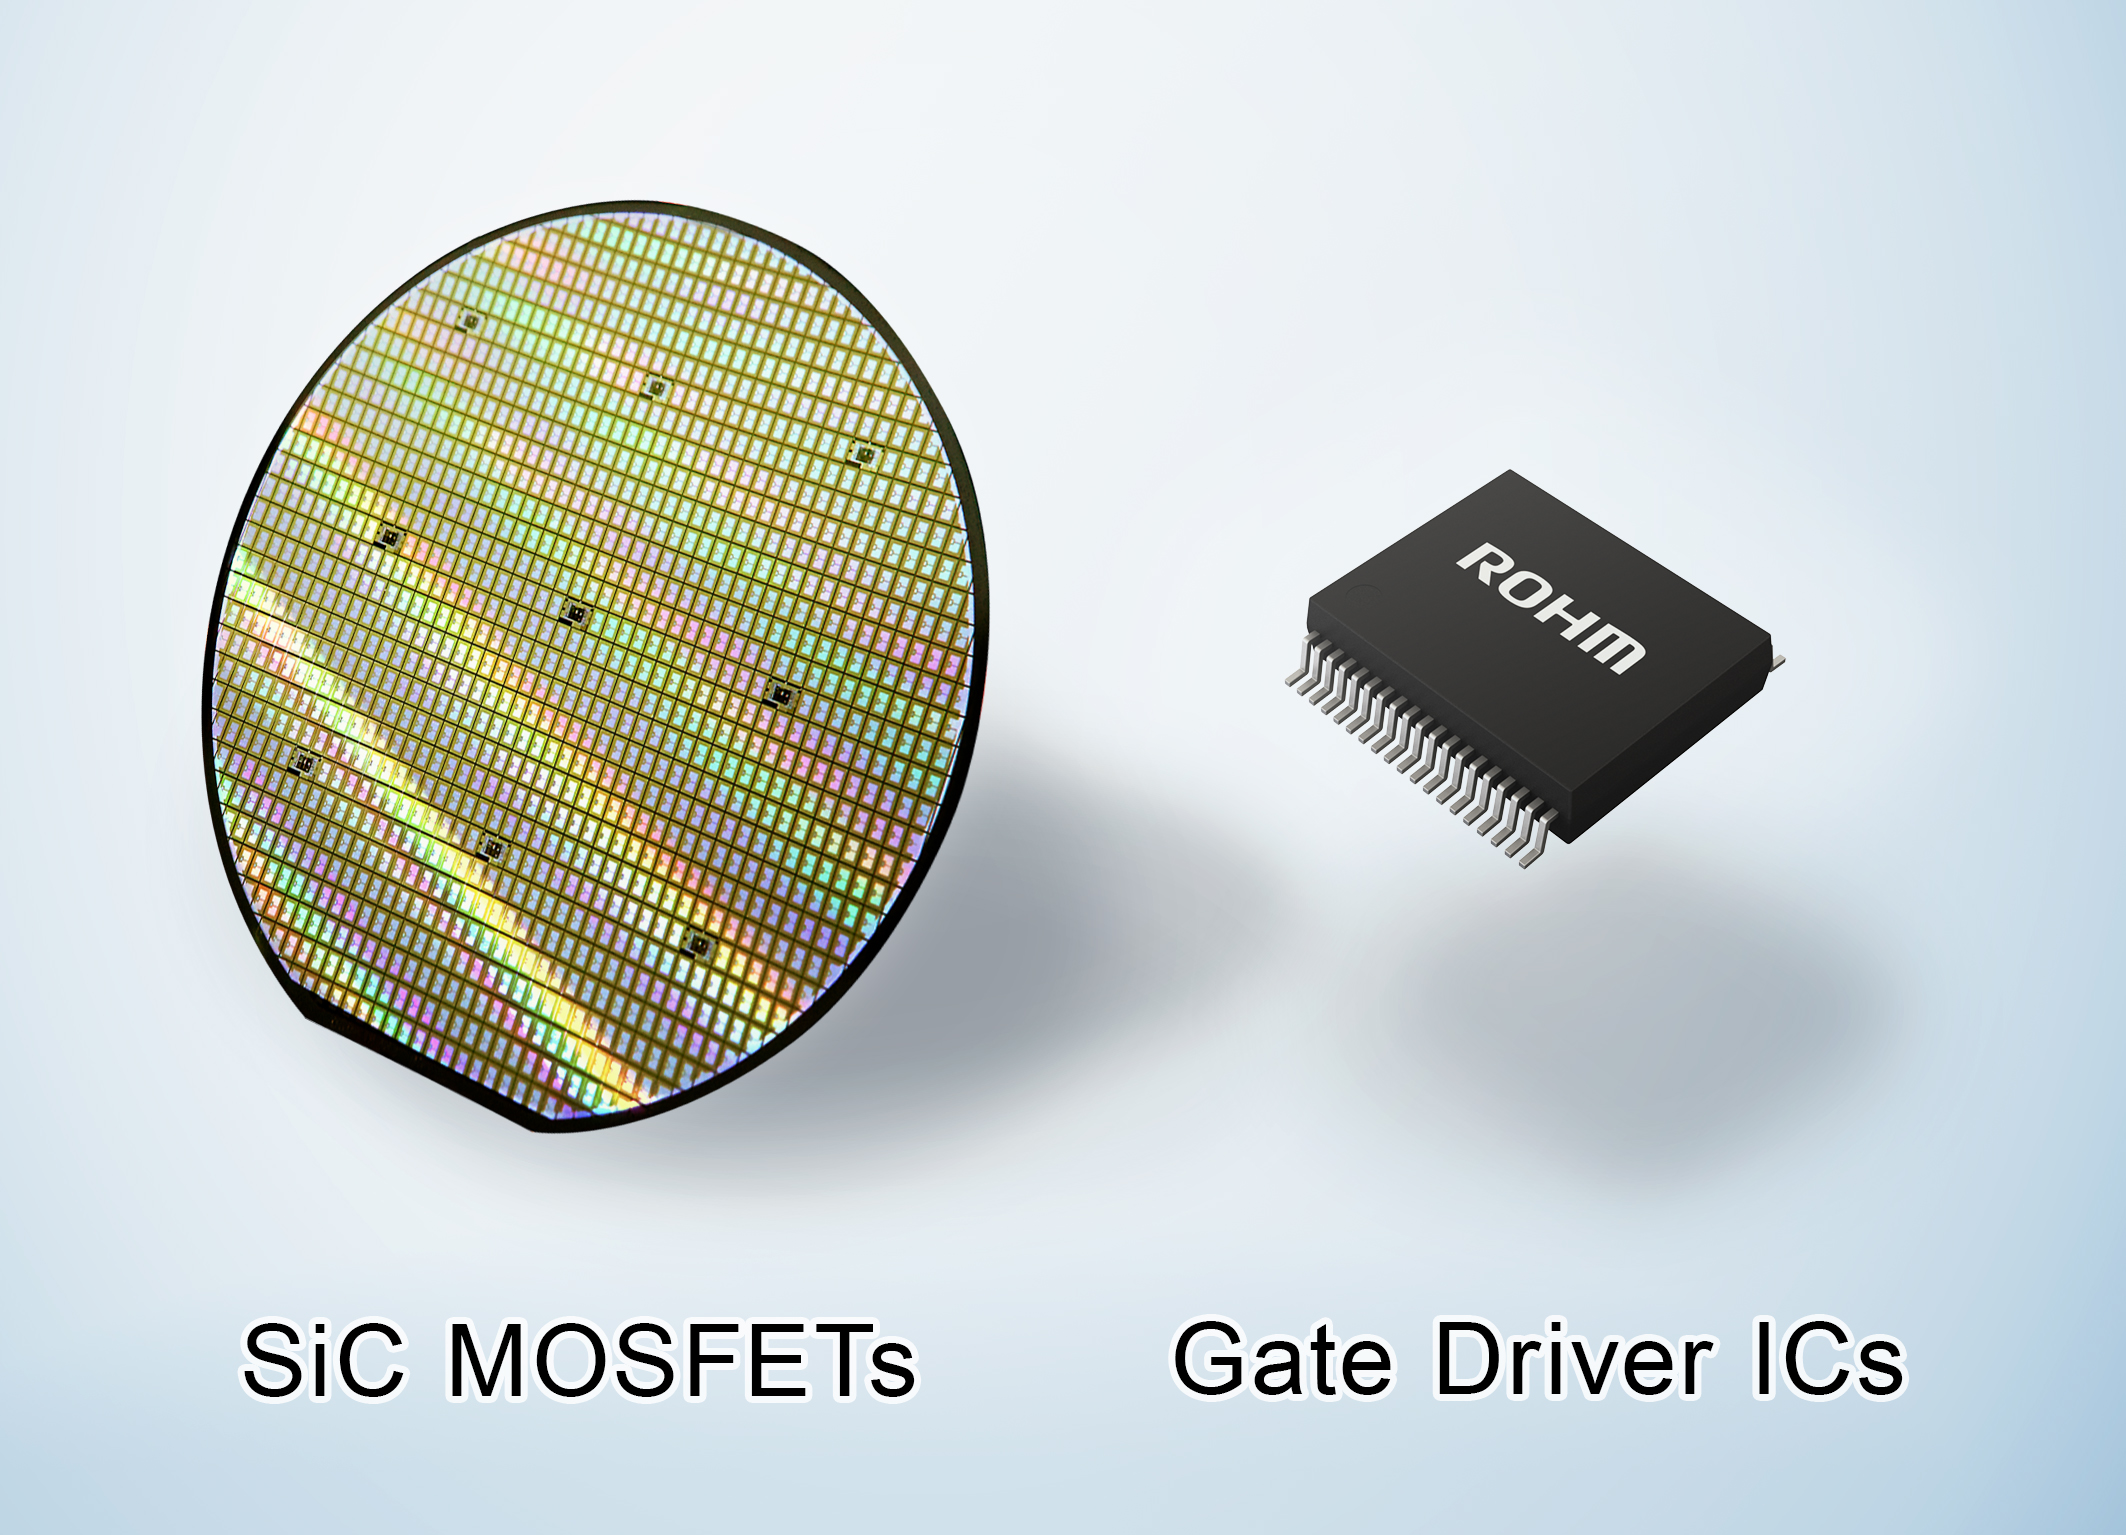 ROHM's Fourth Generation SiC MOSFETs to be Used in Hitachi Astemo's Inverters for Electric Vehicles